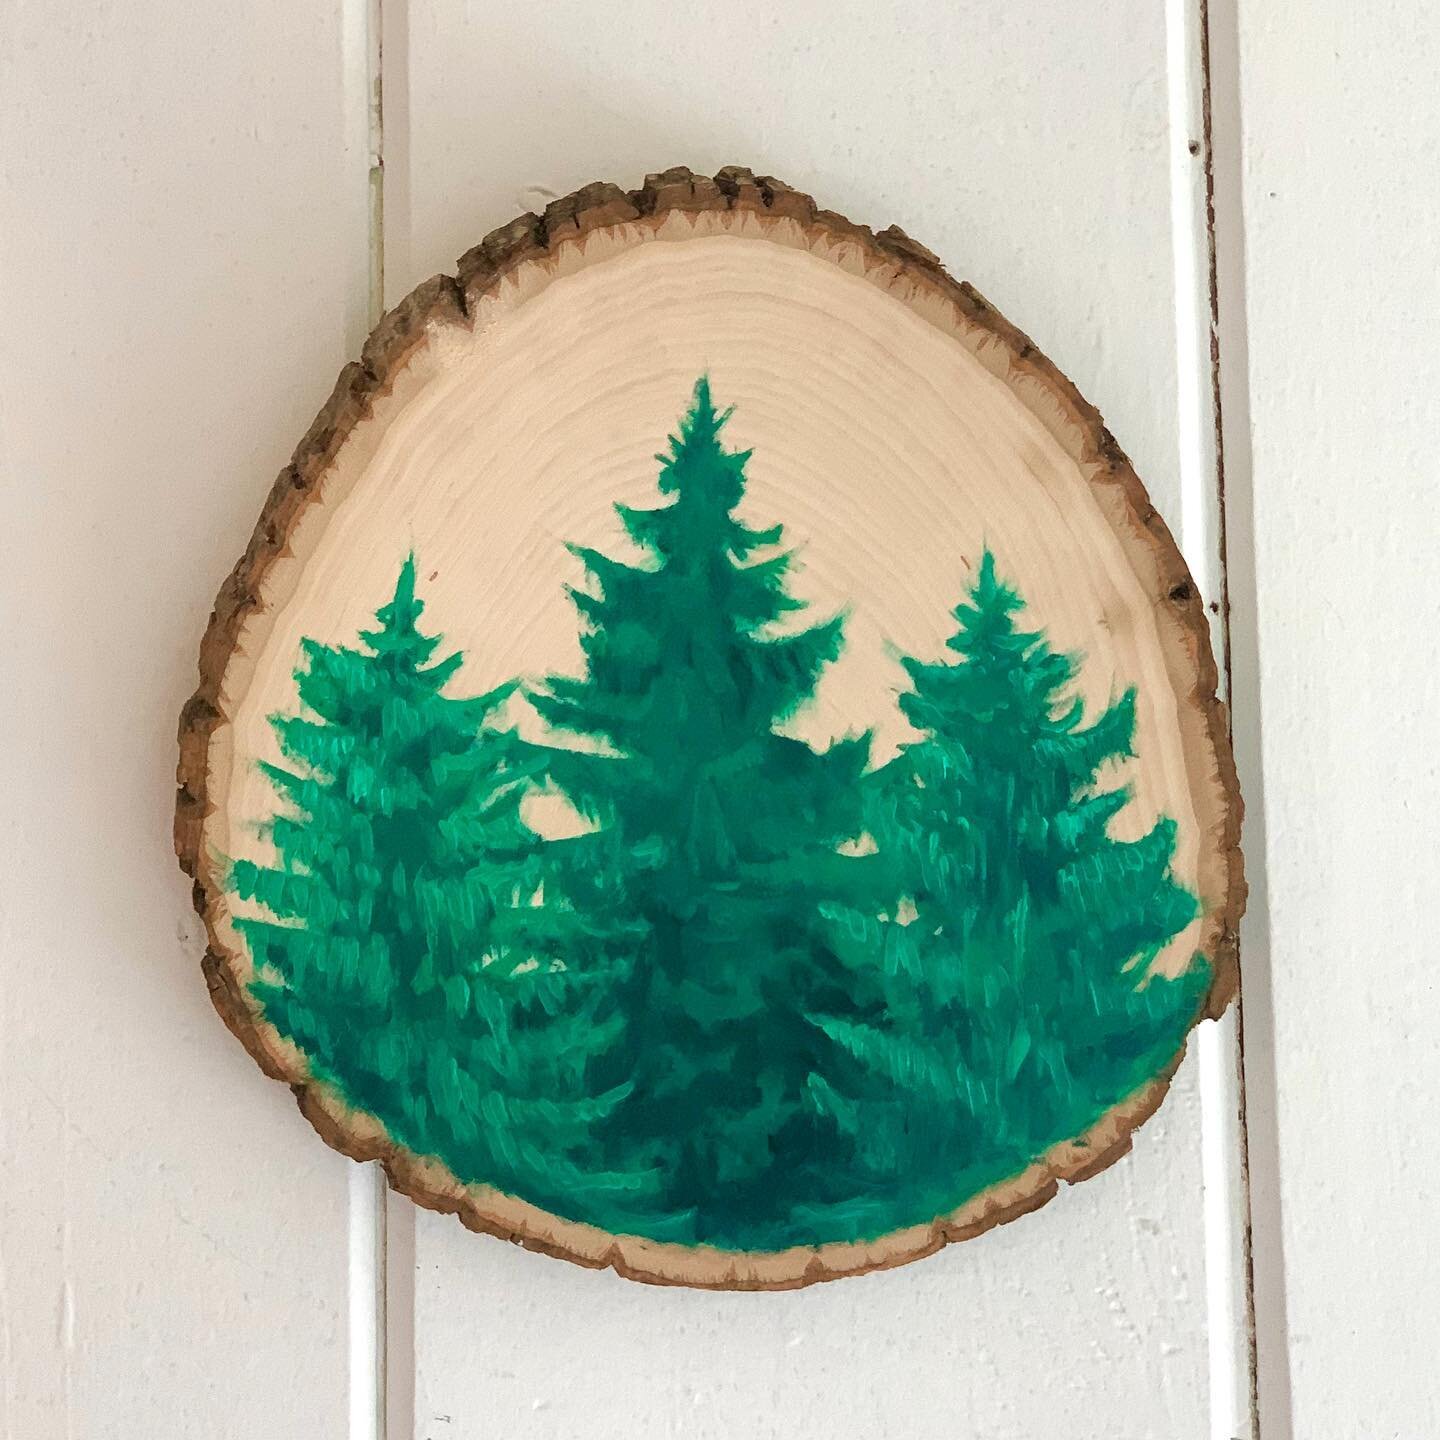 Happy small business Saturday! Support independent, local artists like me by picking up one-of-a-kind, hand-made art &amp; gifts! 
 ✨❄️✨
Use the code SHOPSMALL for 15% off everything in the store (link in bio) for Black Friday Weekend! New wood slice